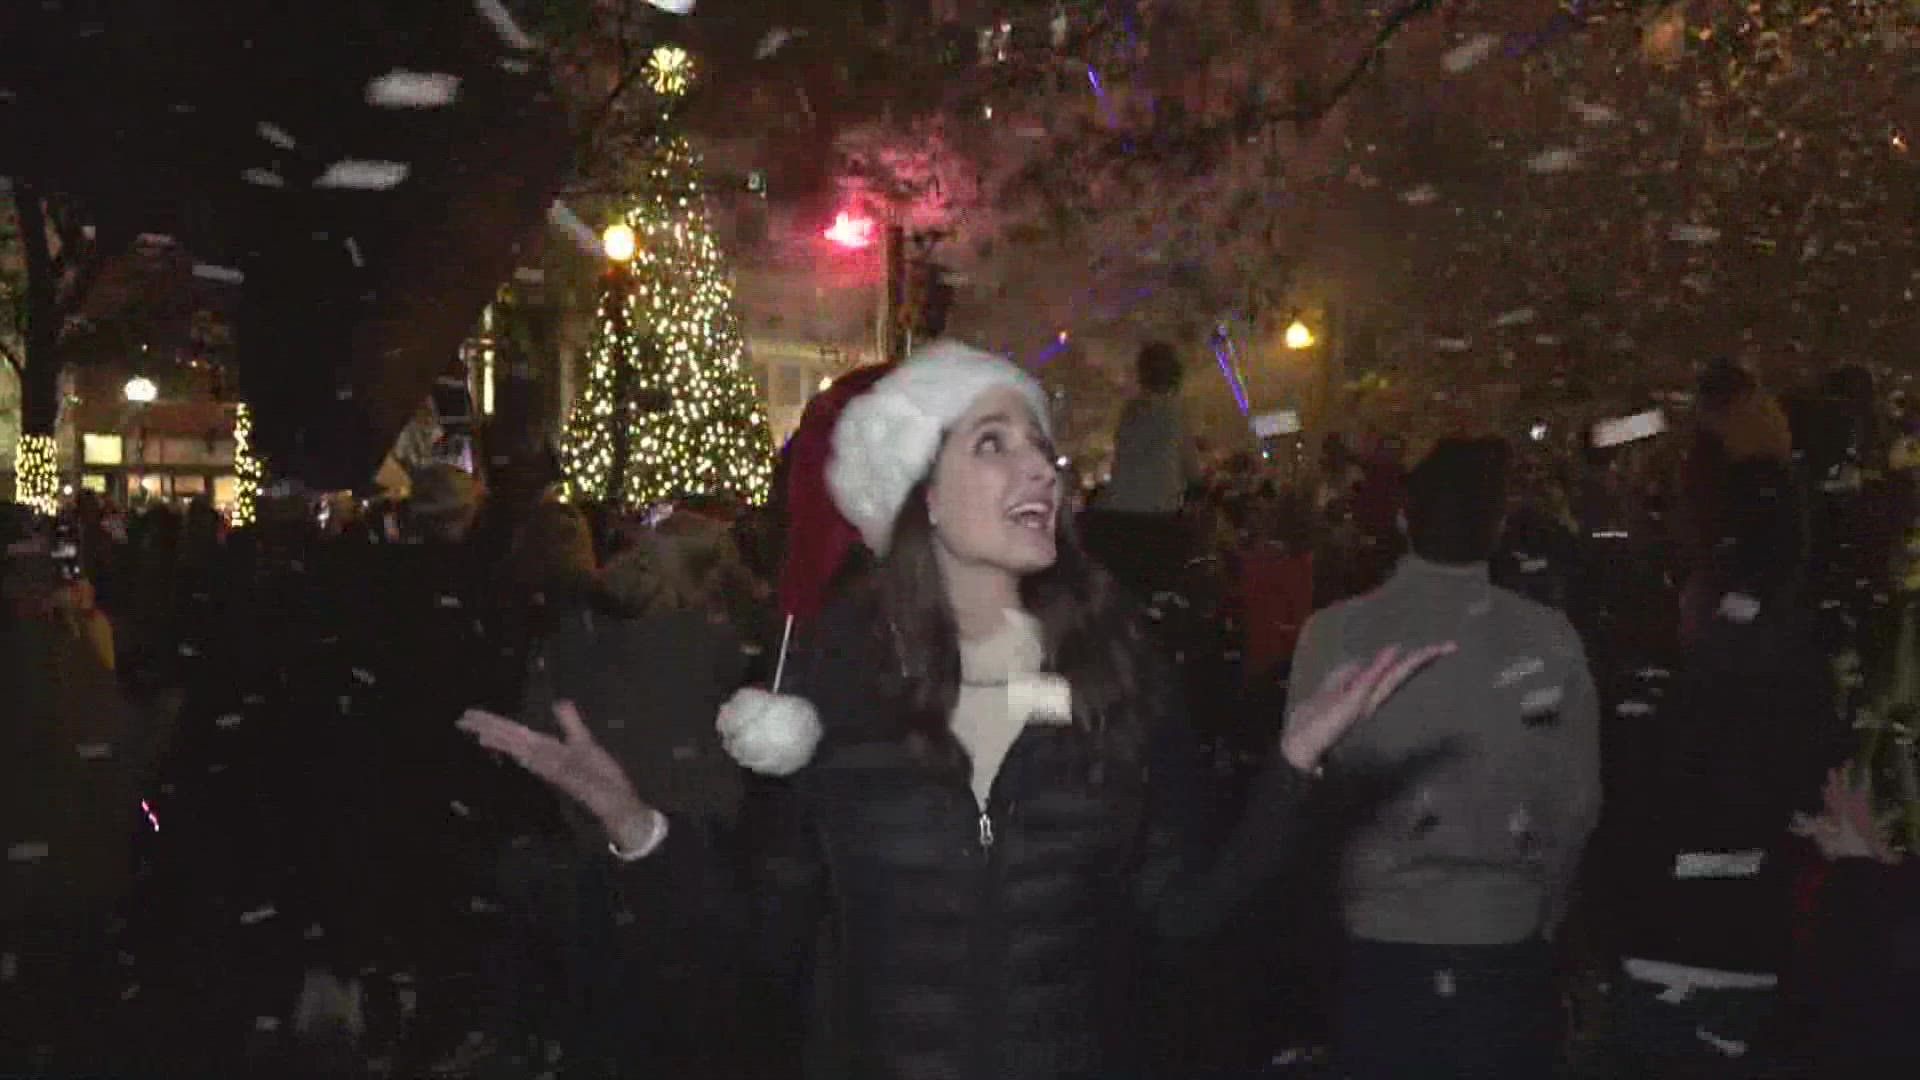 Downtown Knoxville's Christmas in the City began Friday night with the tree lighting ahead of the Christmas Parade next week.